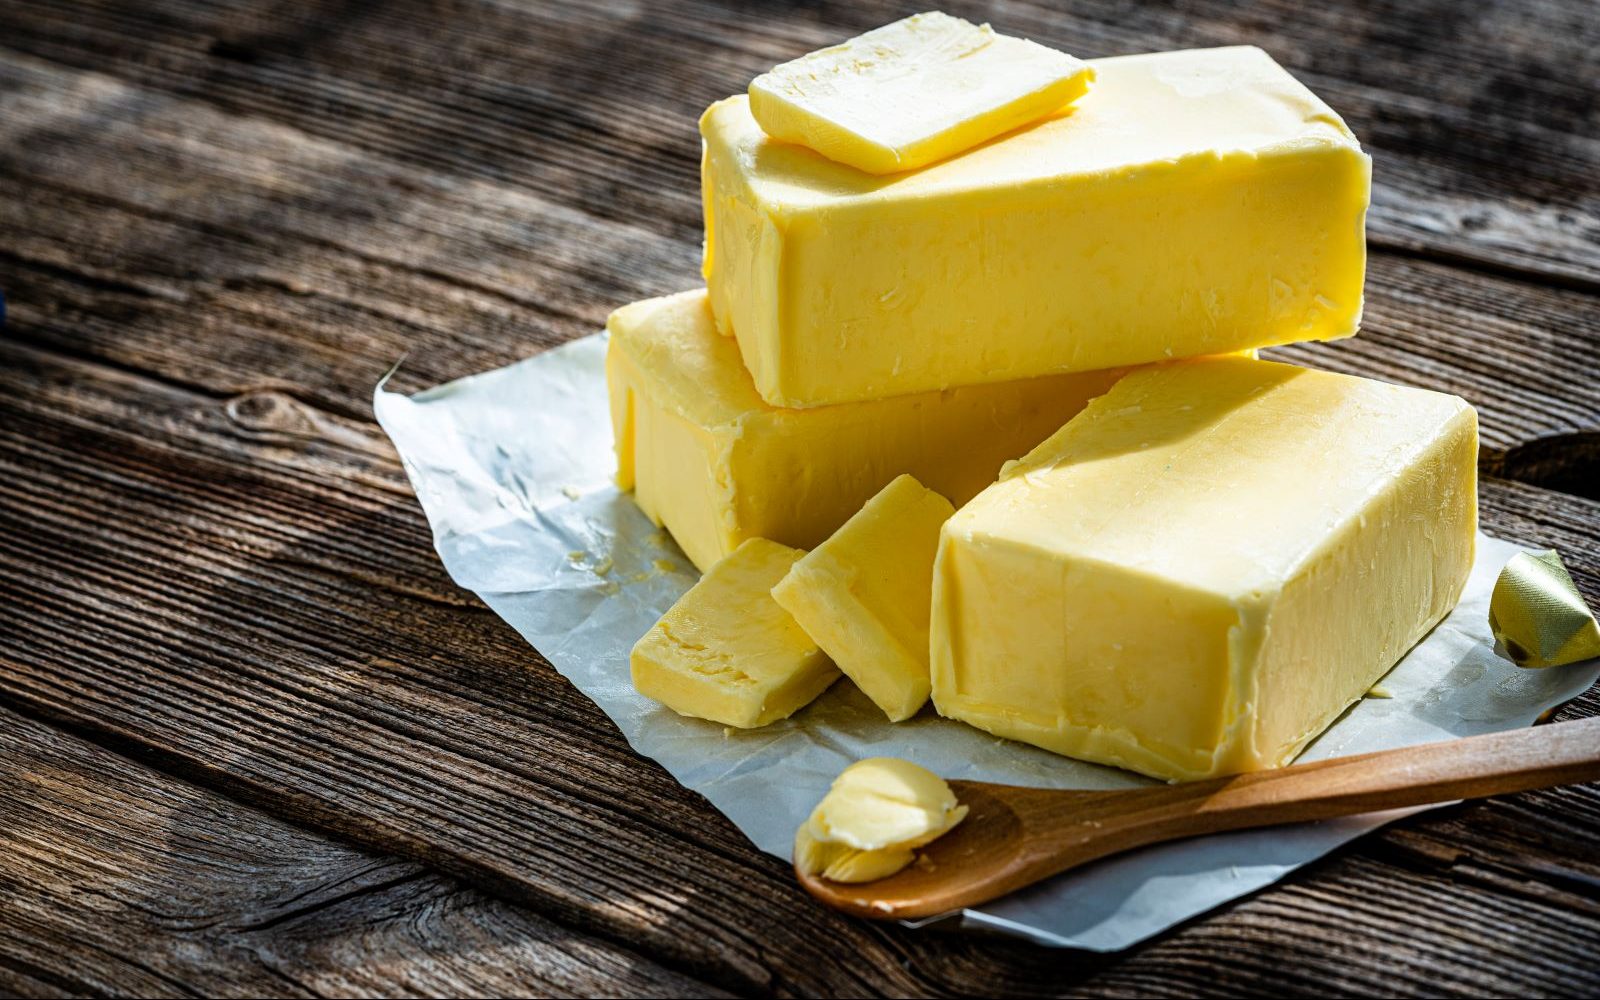 Whether you opt for butter or margarine, you’re bound to consume some fat. But the trick is choosing the right ones.